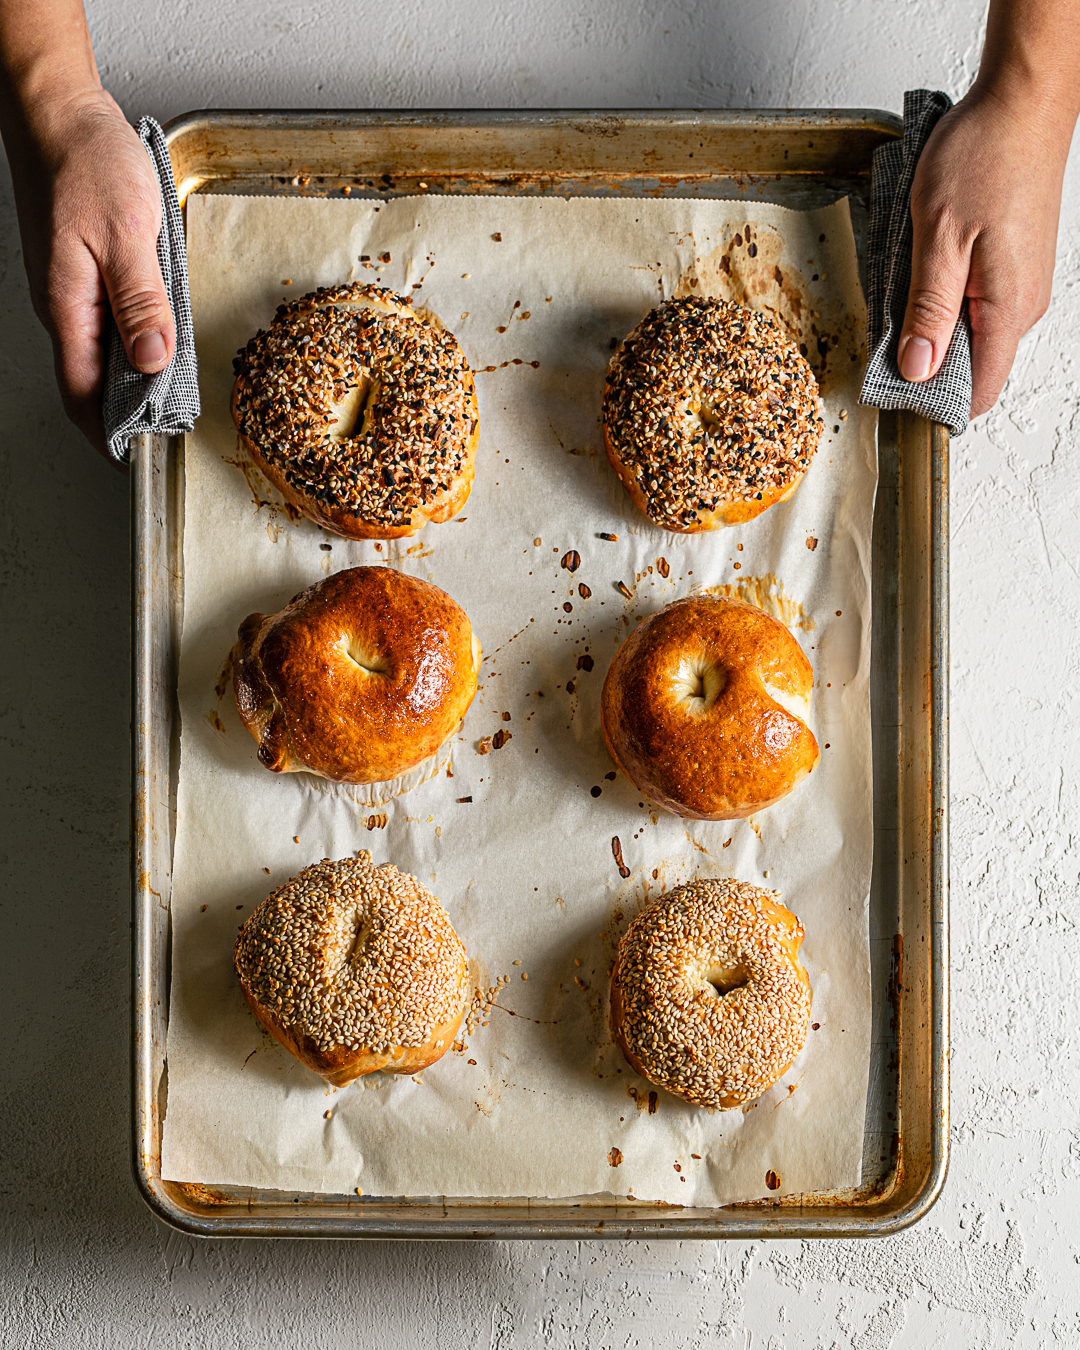 How to Make Bagels